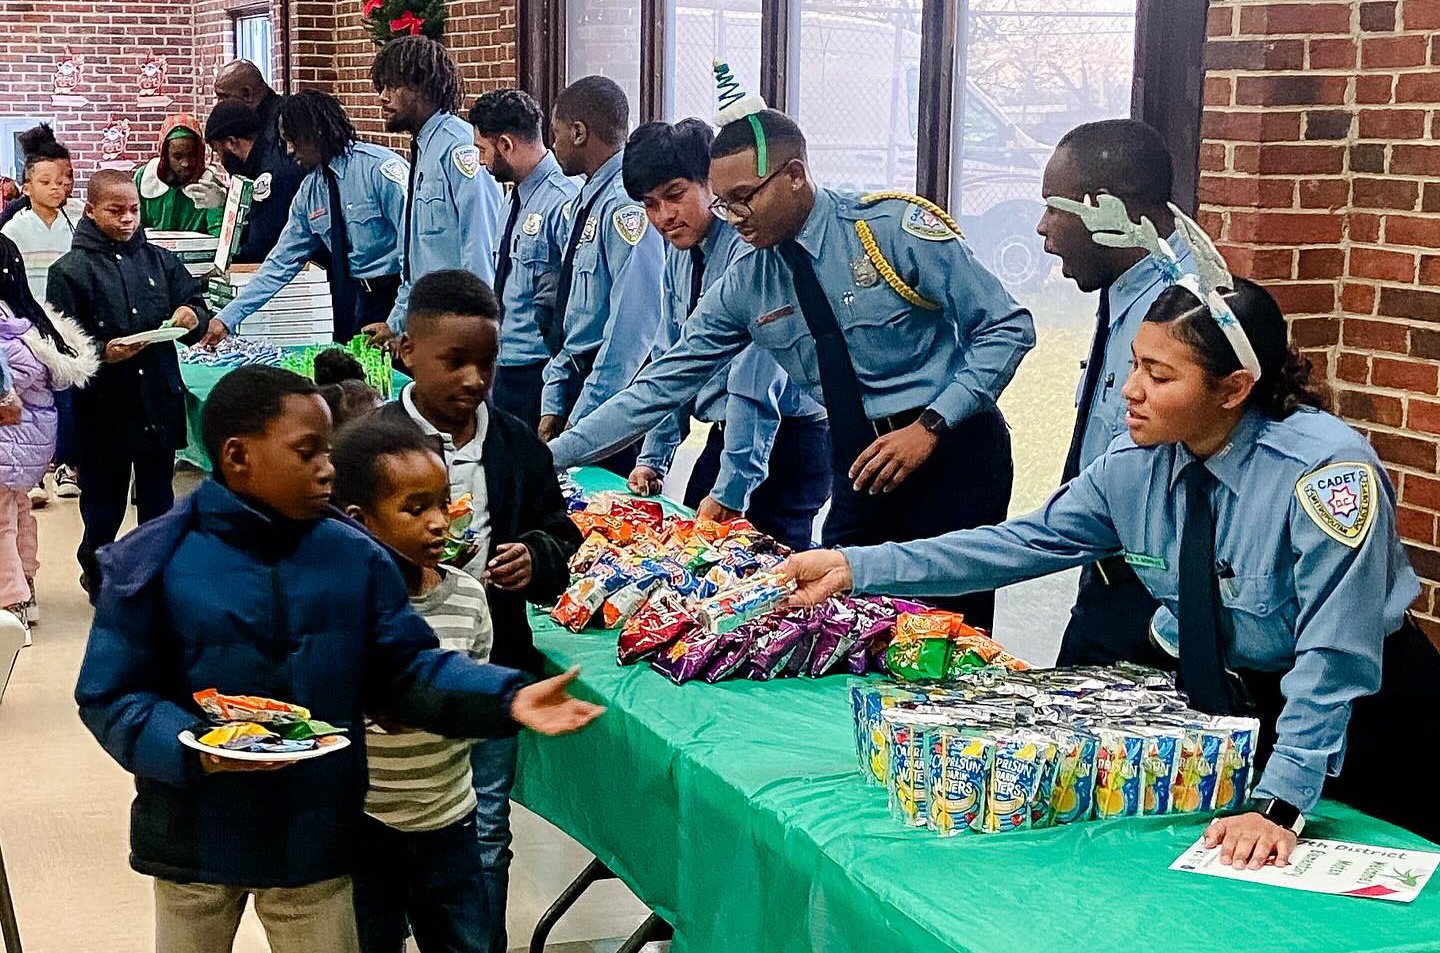 Police officers in uniform handing out snacks to kids